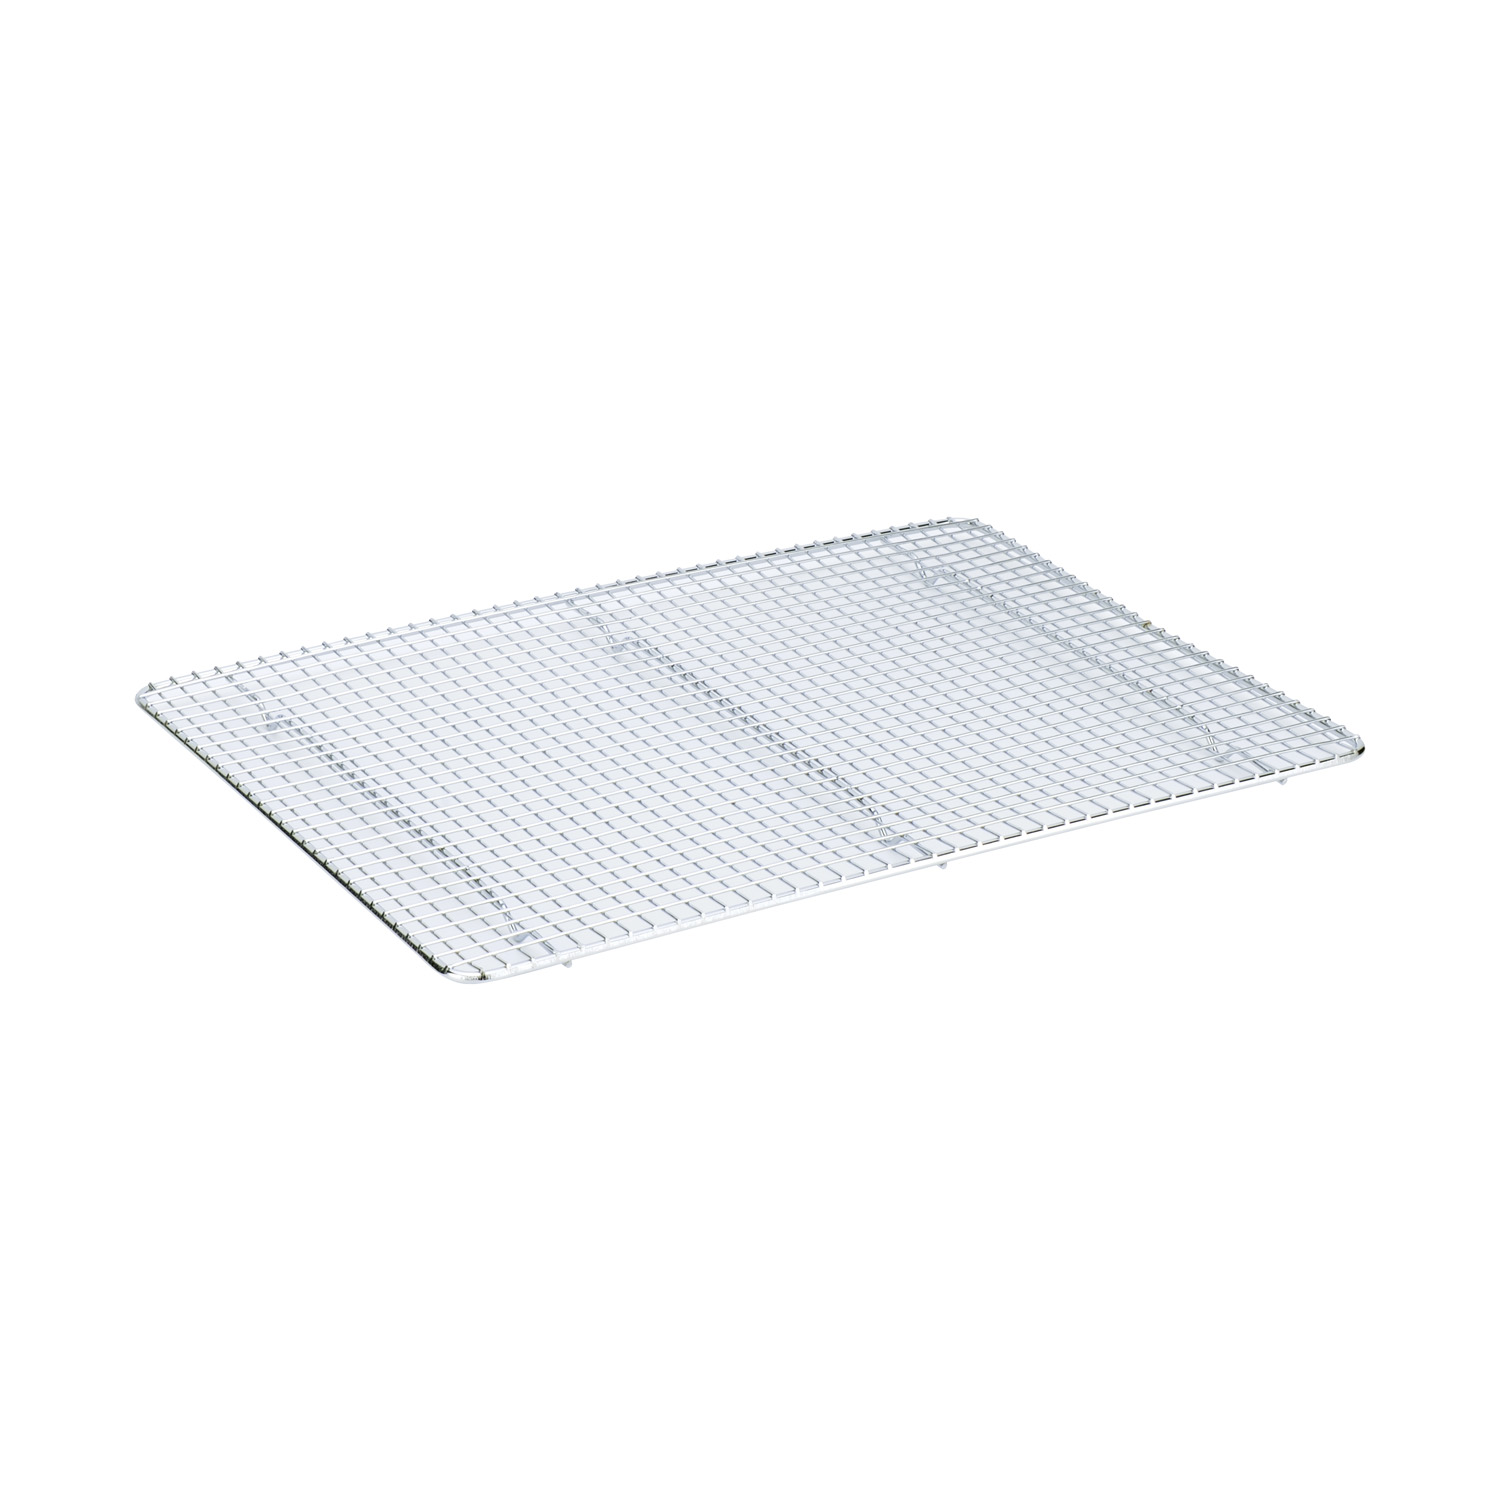 CAC China PGSH-1612 Half Size Sheet Pan with Footed Grate 16" x 12"